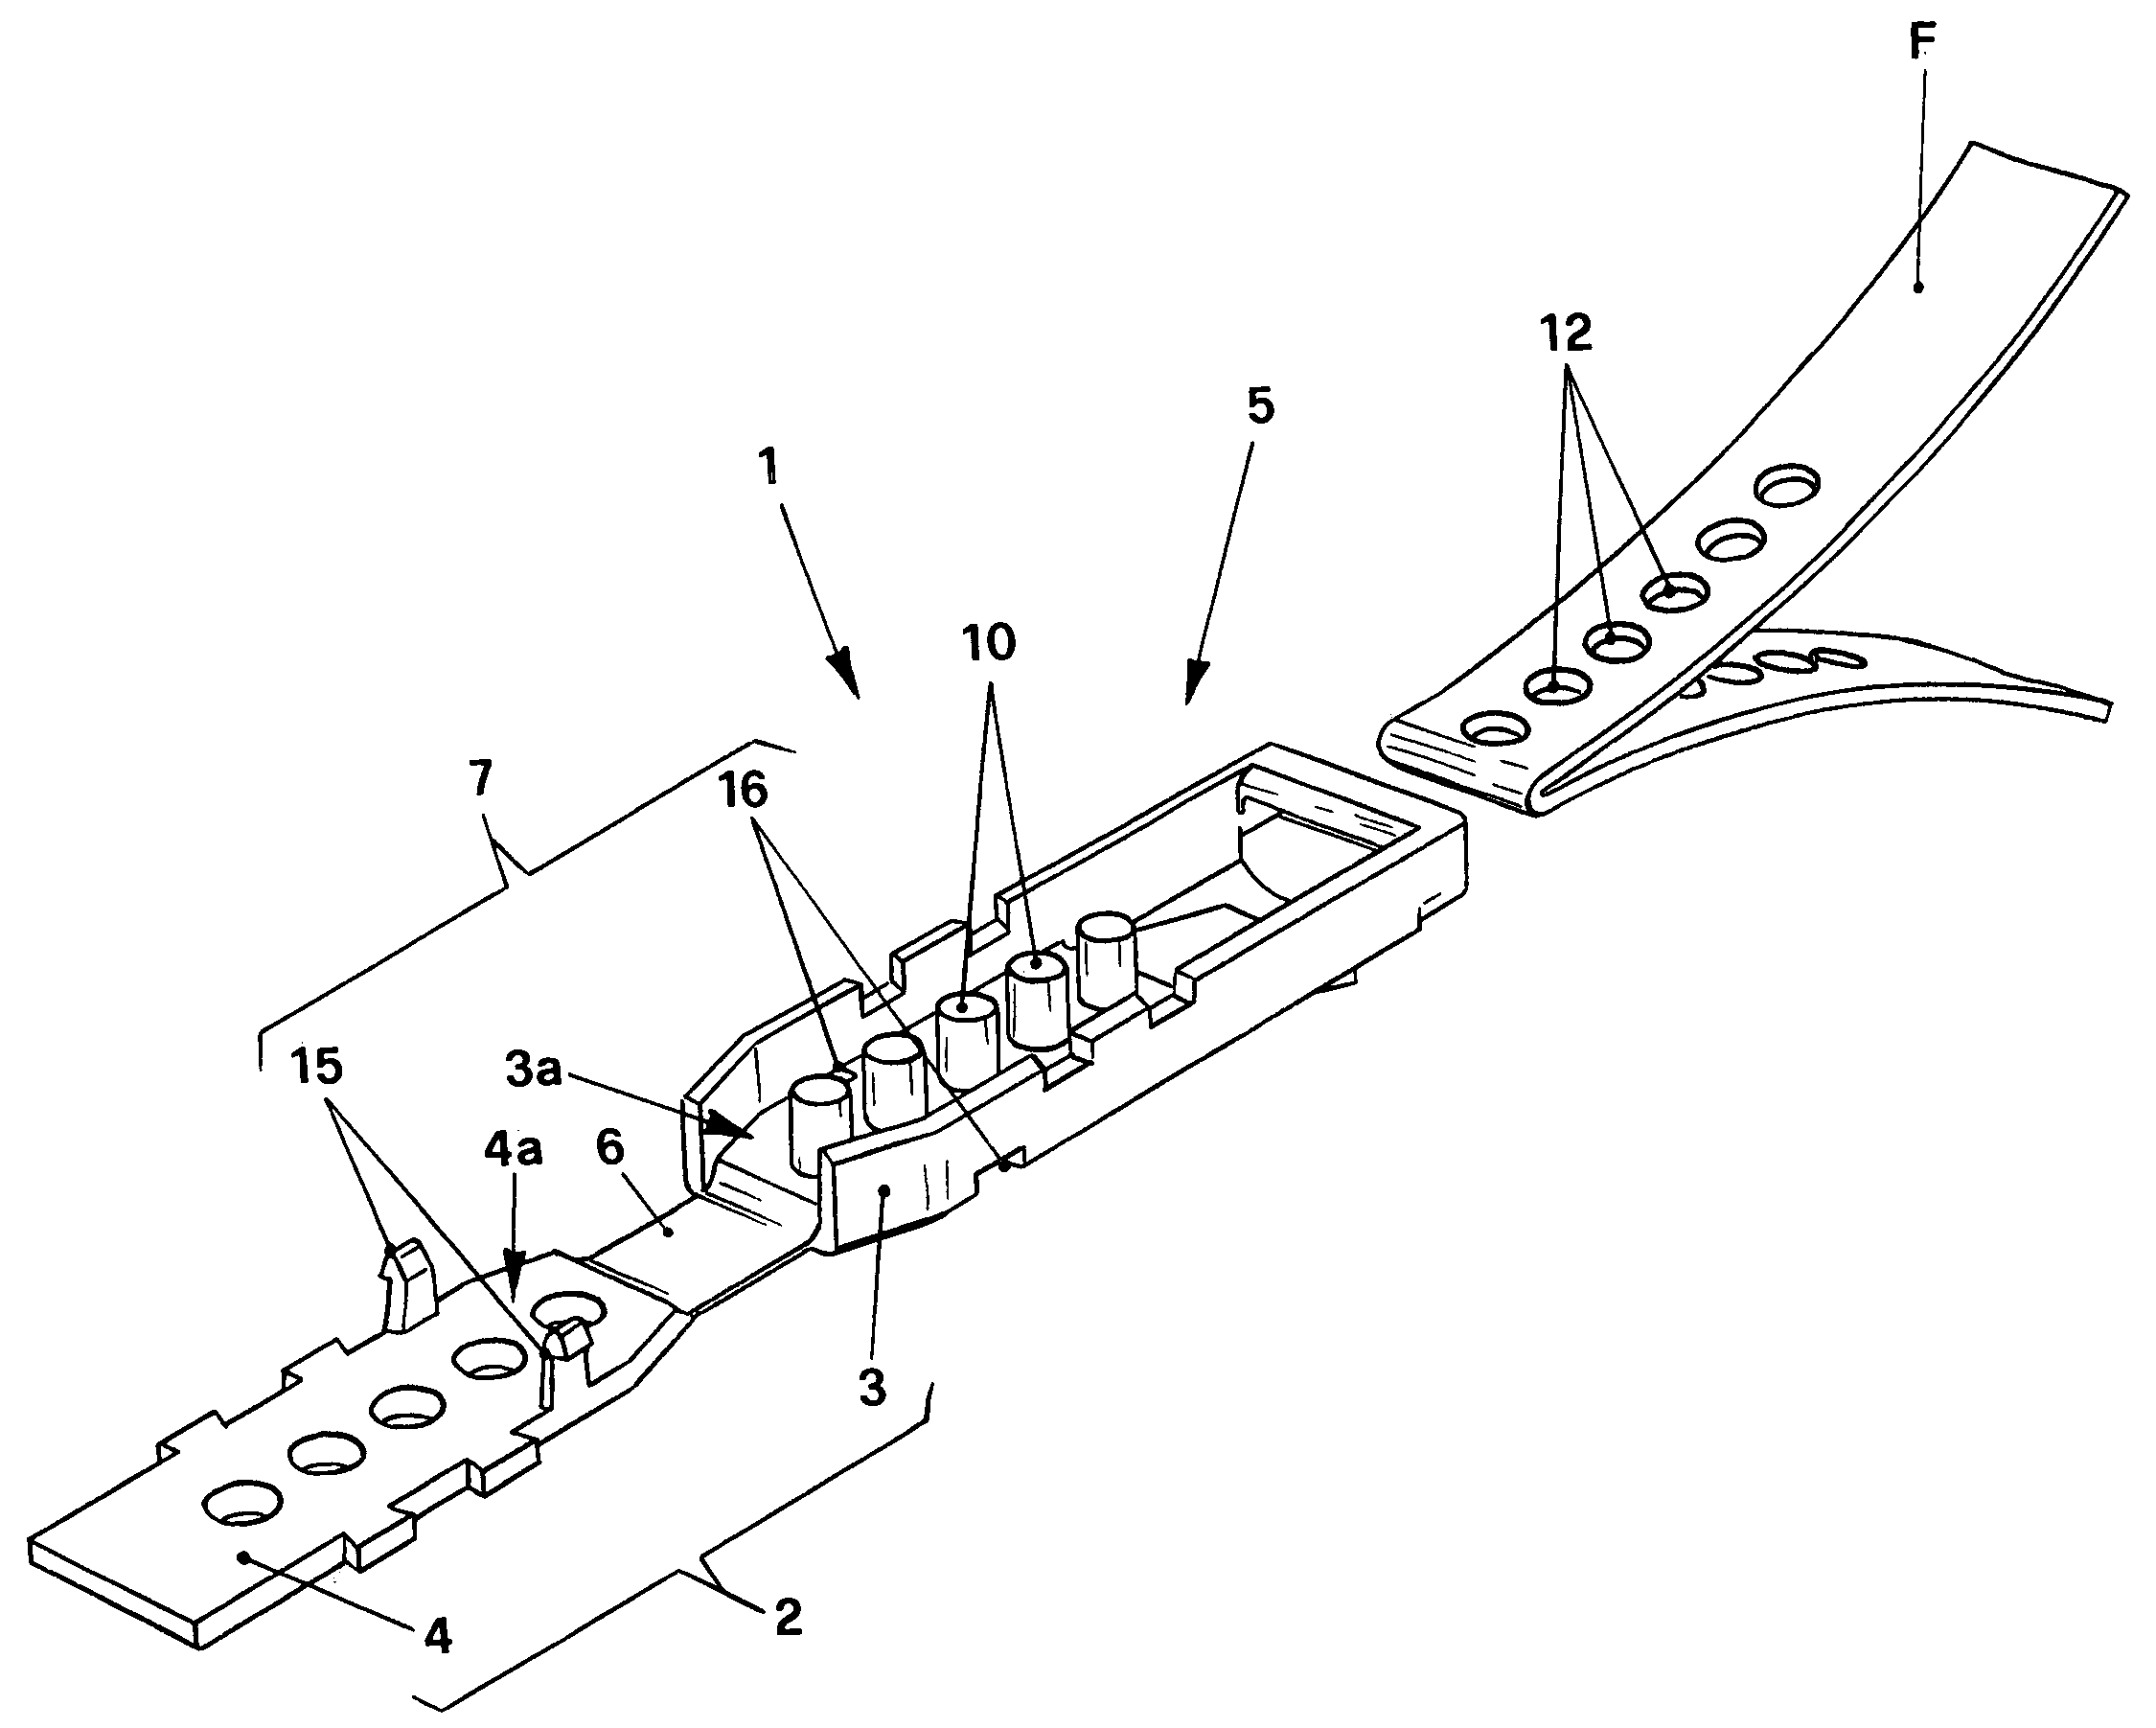 Buckle for connecting a wrist strap to the handgrip of a pole for use in sporting activities